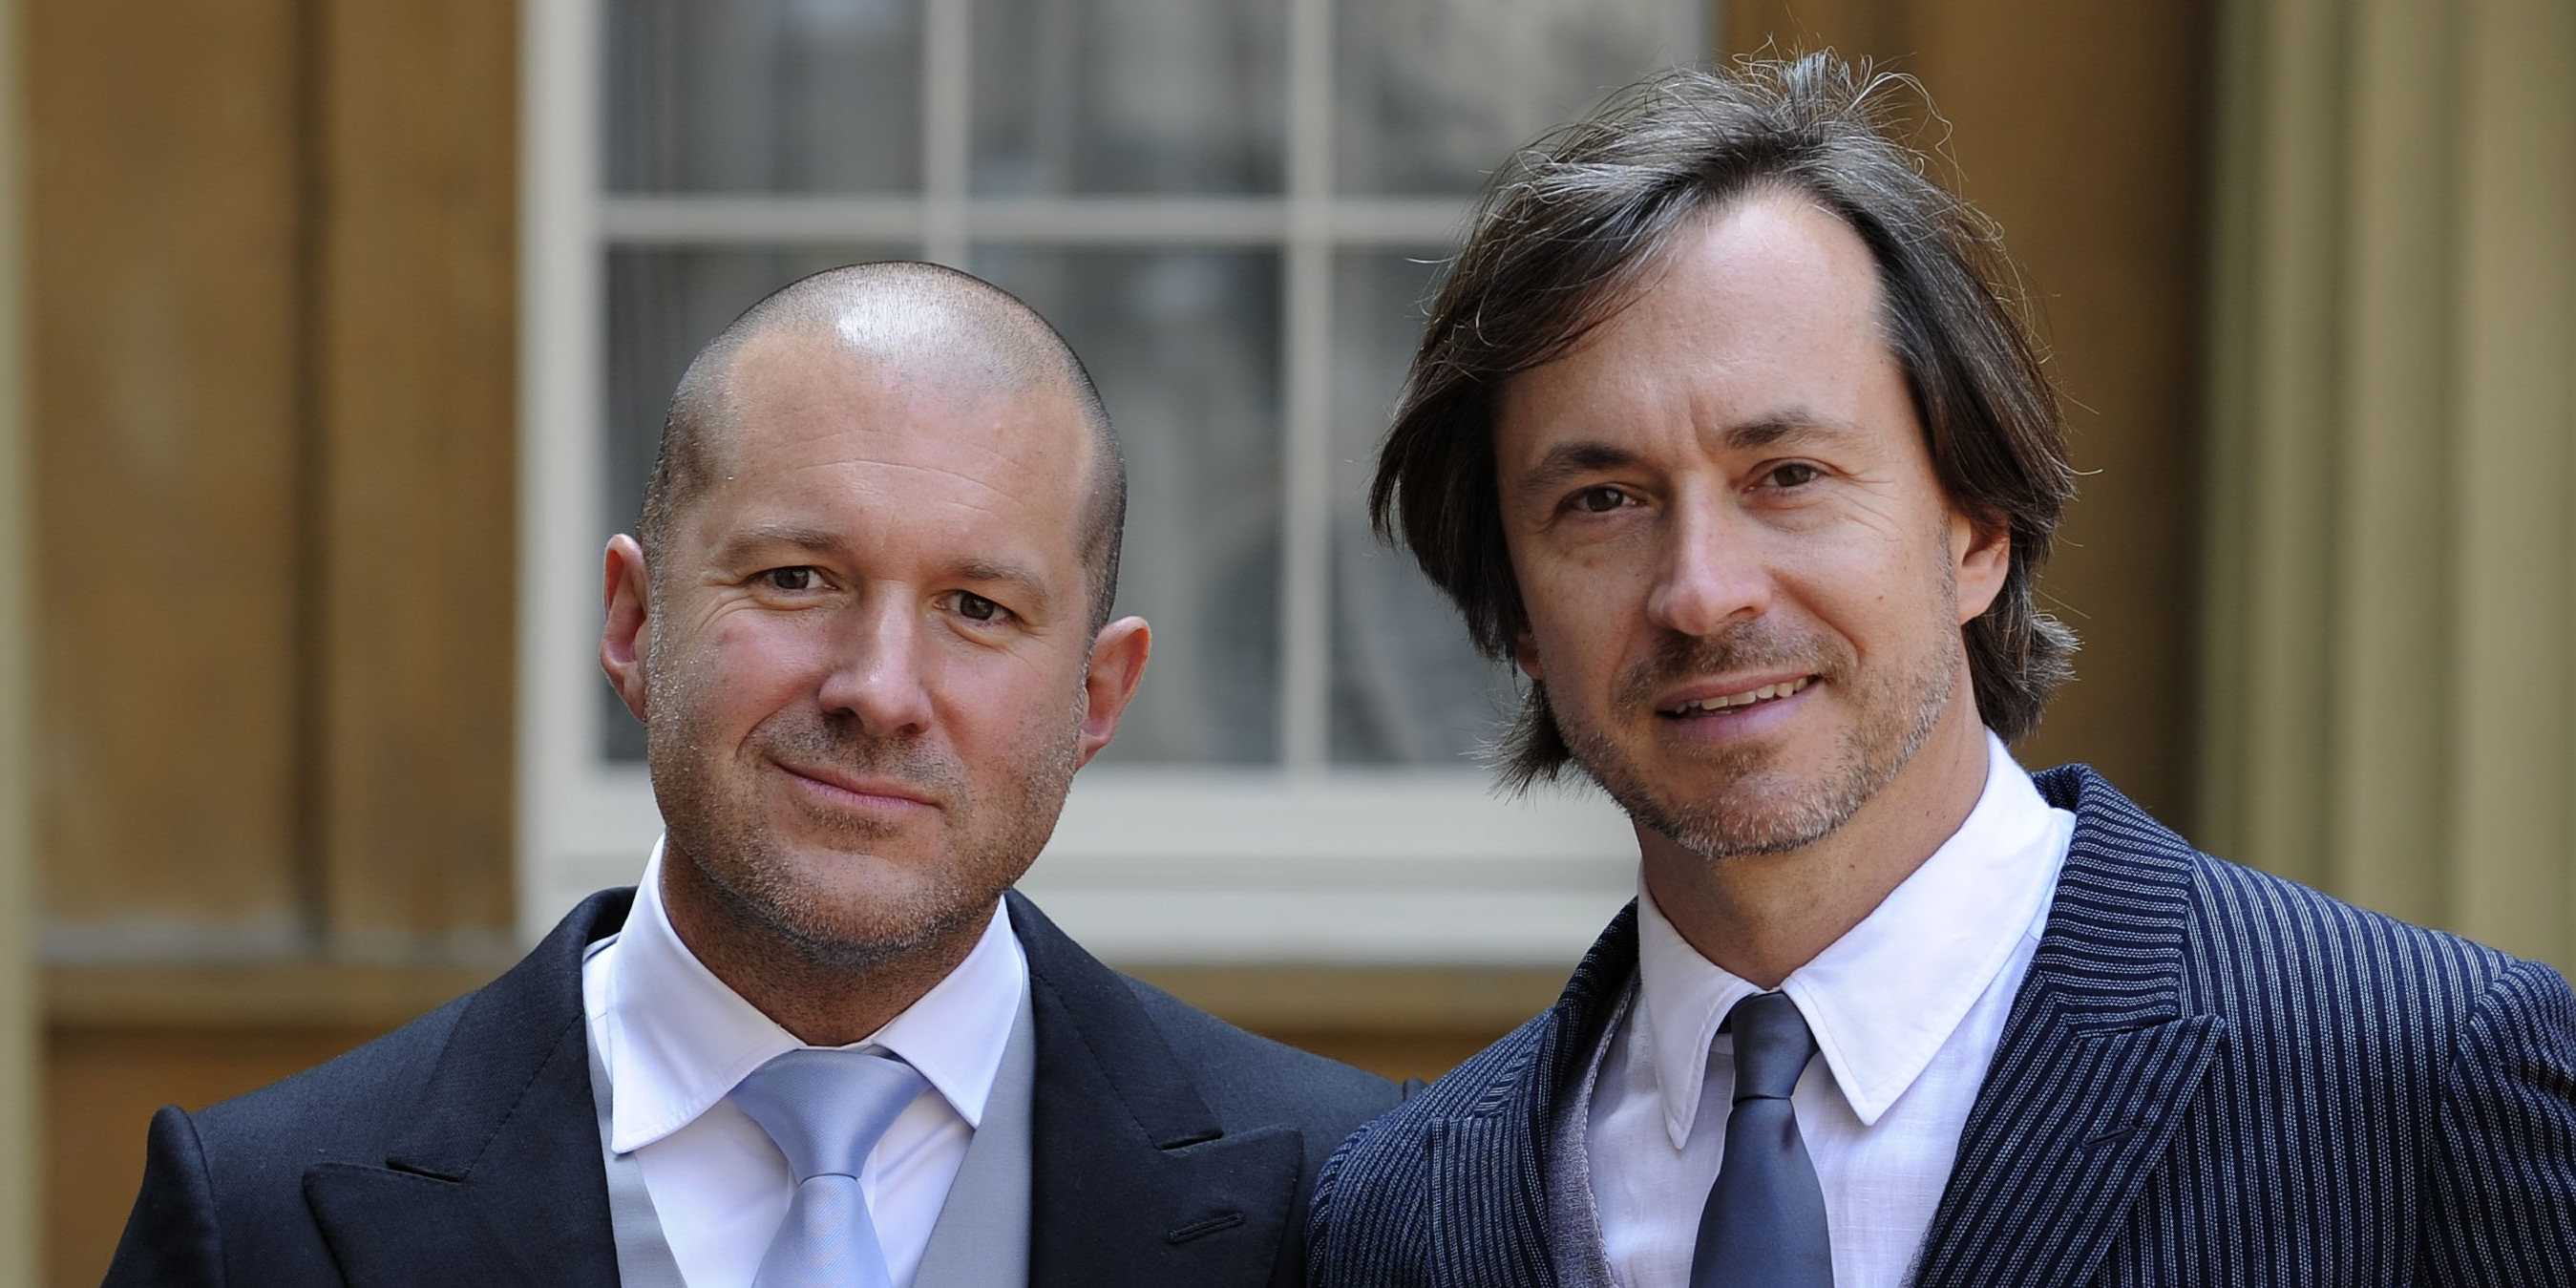 marc-newson-jony-ive-apple-hires-for-iwatch